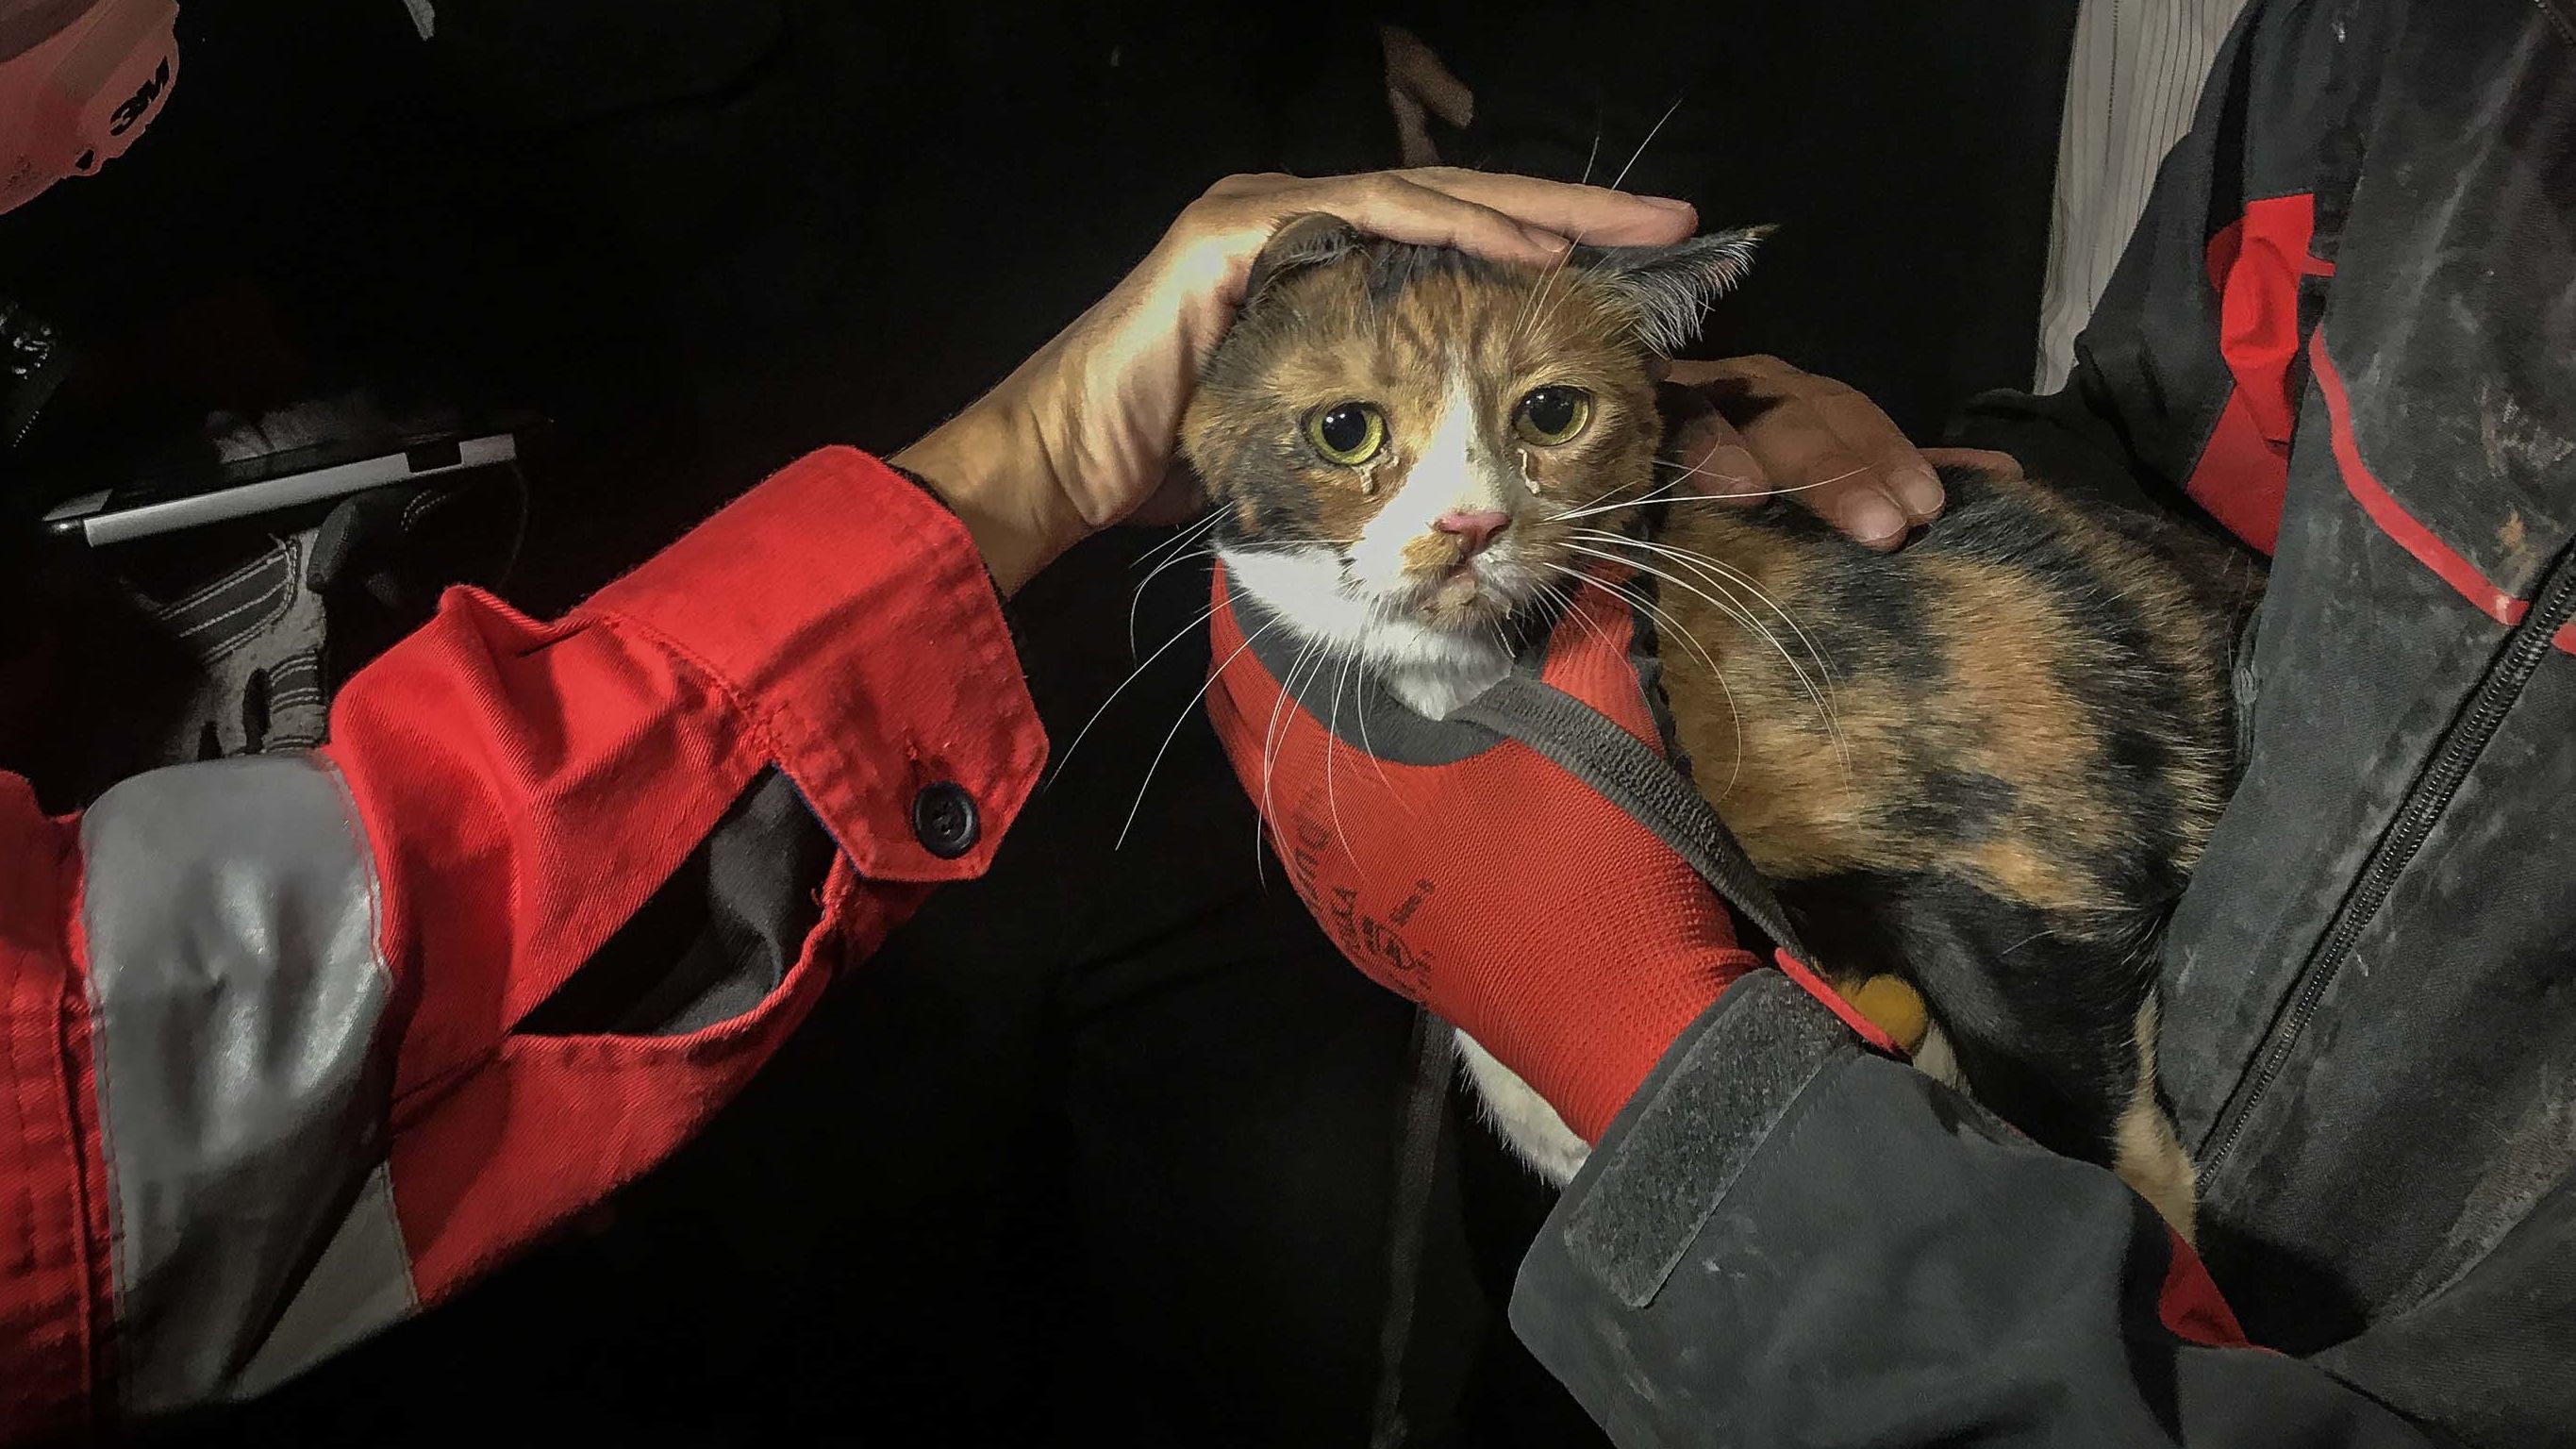 This rescued cat was found by a search dog and pulled from the debris in Izmir.